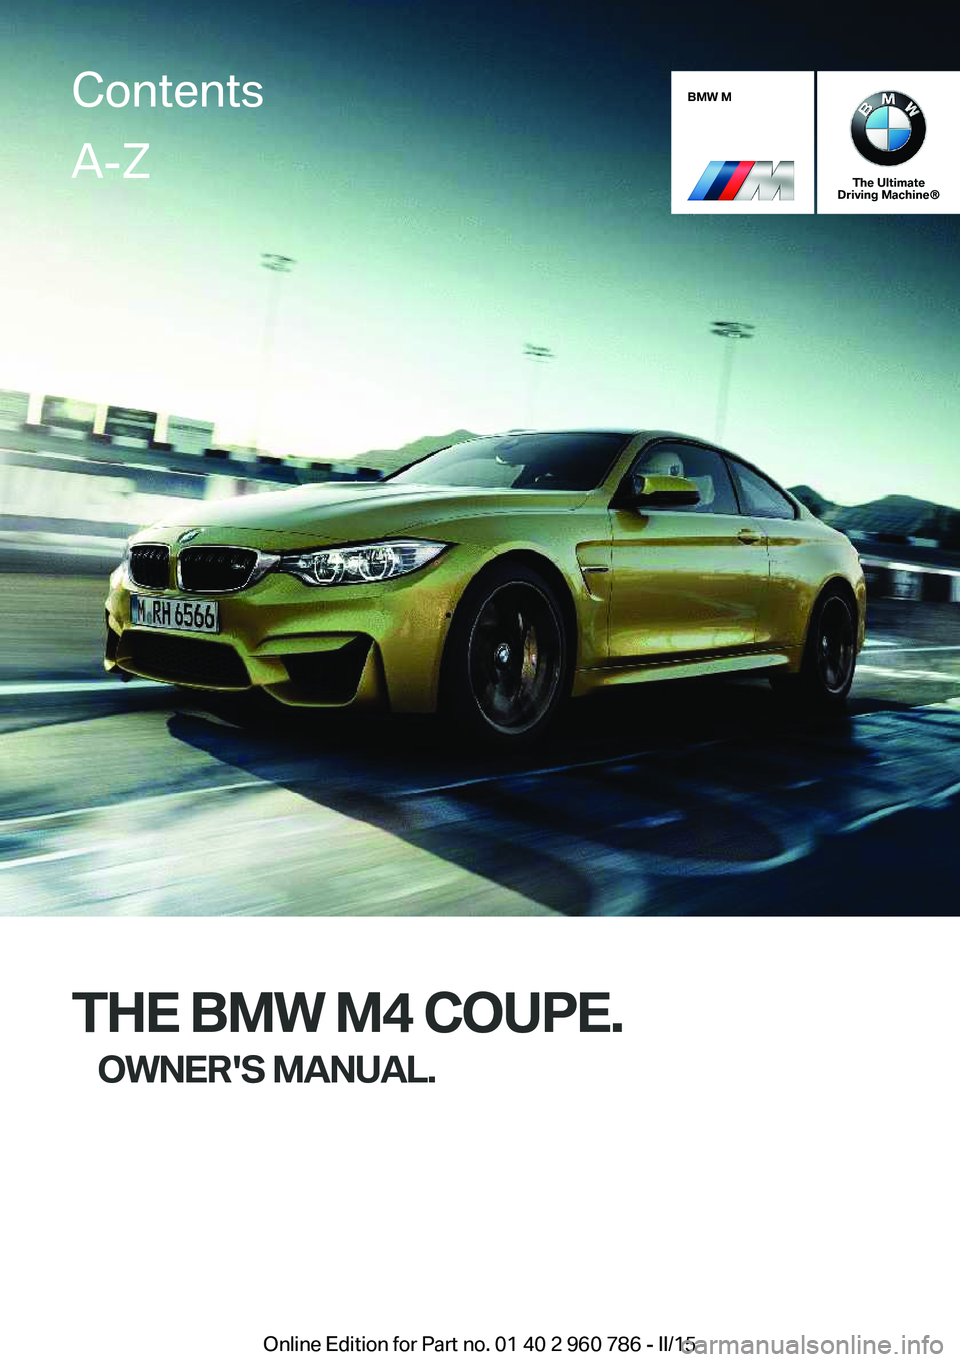 BMW M4 2015  Owners Manual BMW M
The Ultimate
Driving Machine®
THE BMW M4 COUPE.
OWNER'S MANUAL.
ContentsA-Z
Online Edition for Part no. 01 40 2 960 786 - II/15   